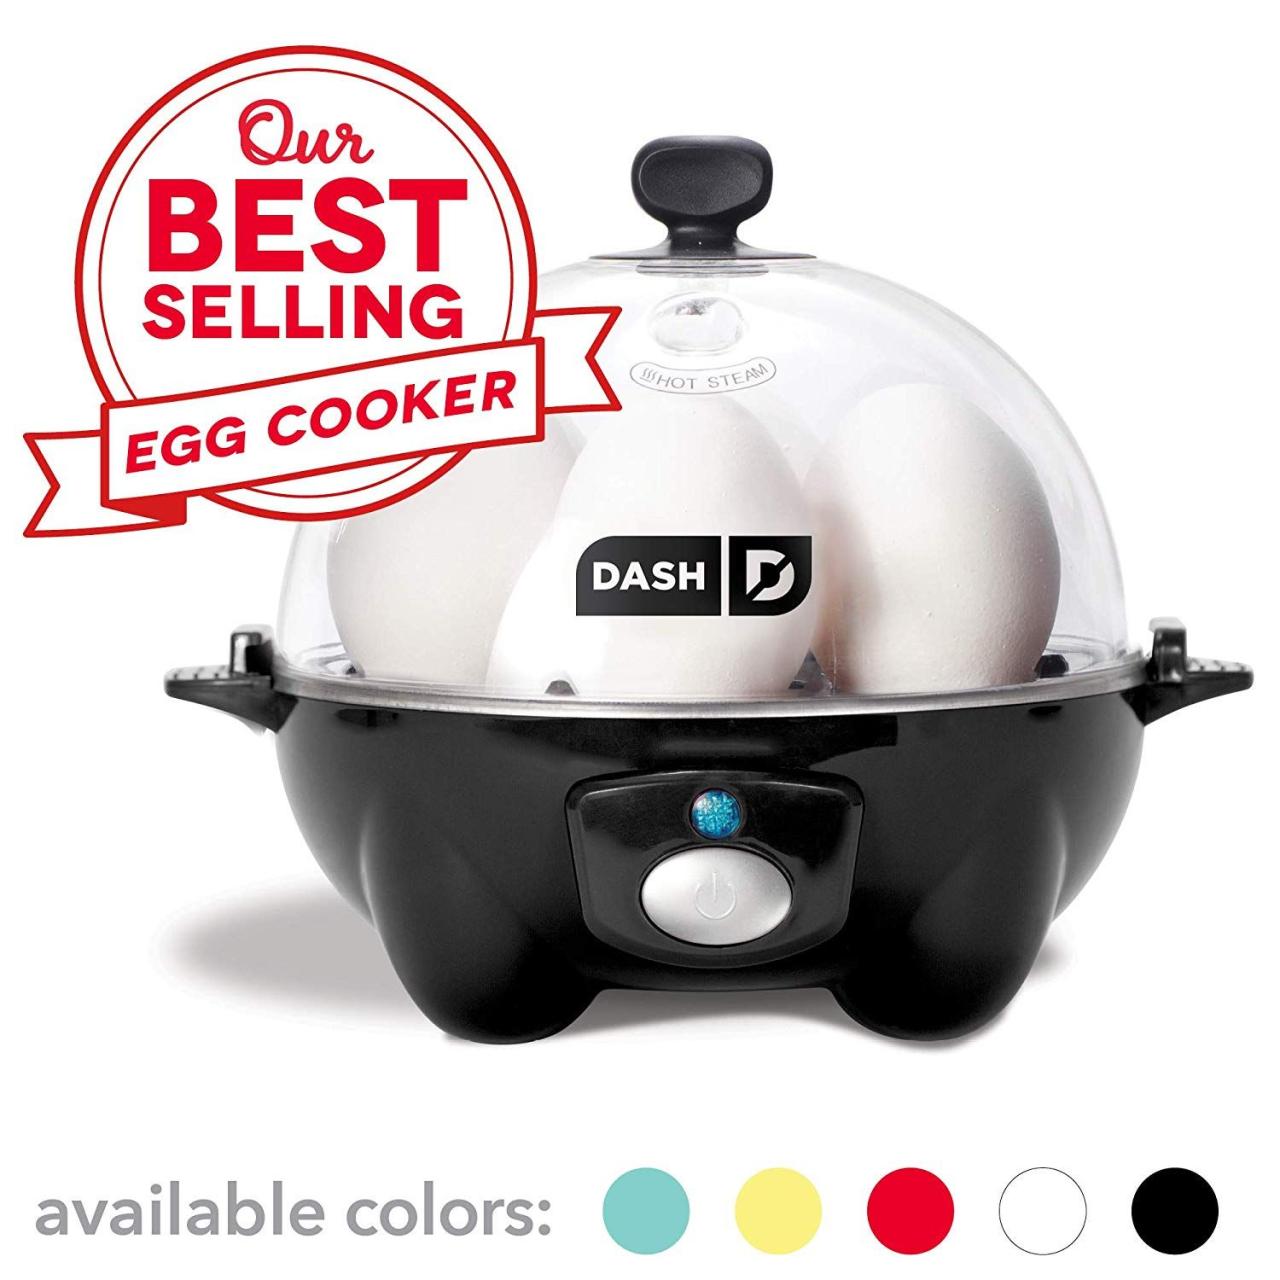 How Does Dash Rapid Egg Cooker Work